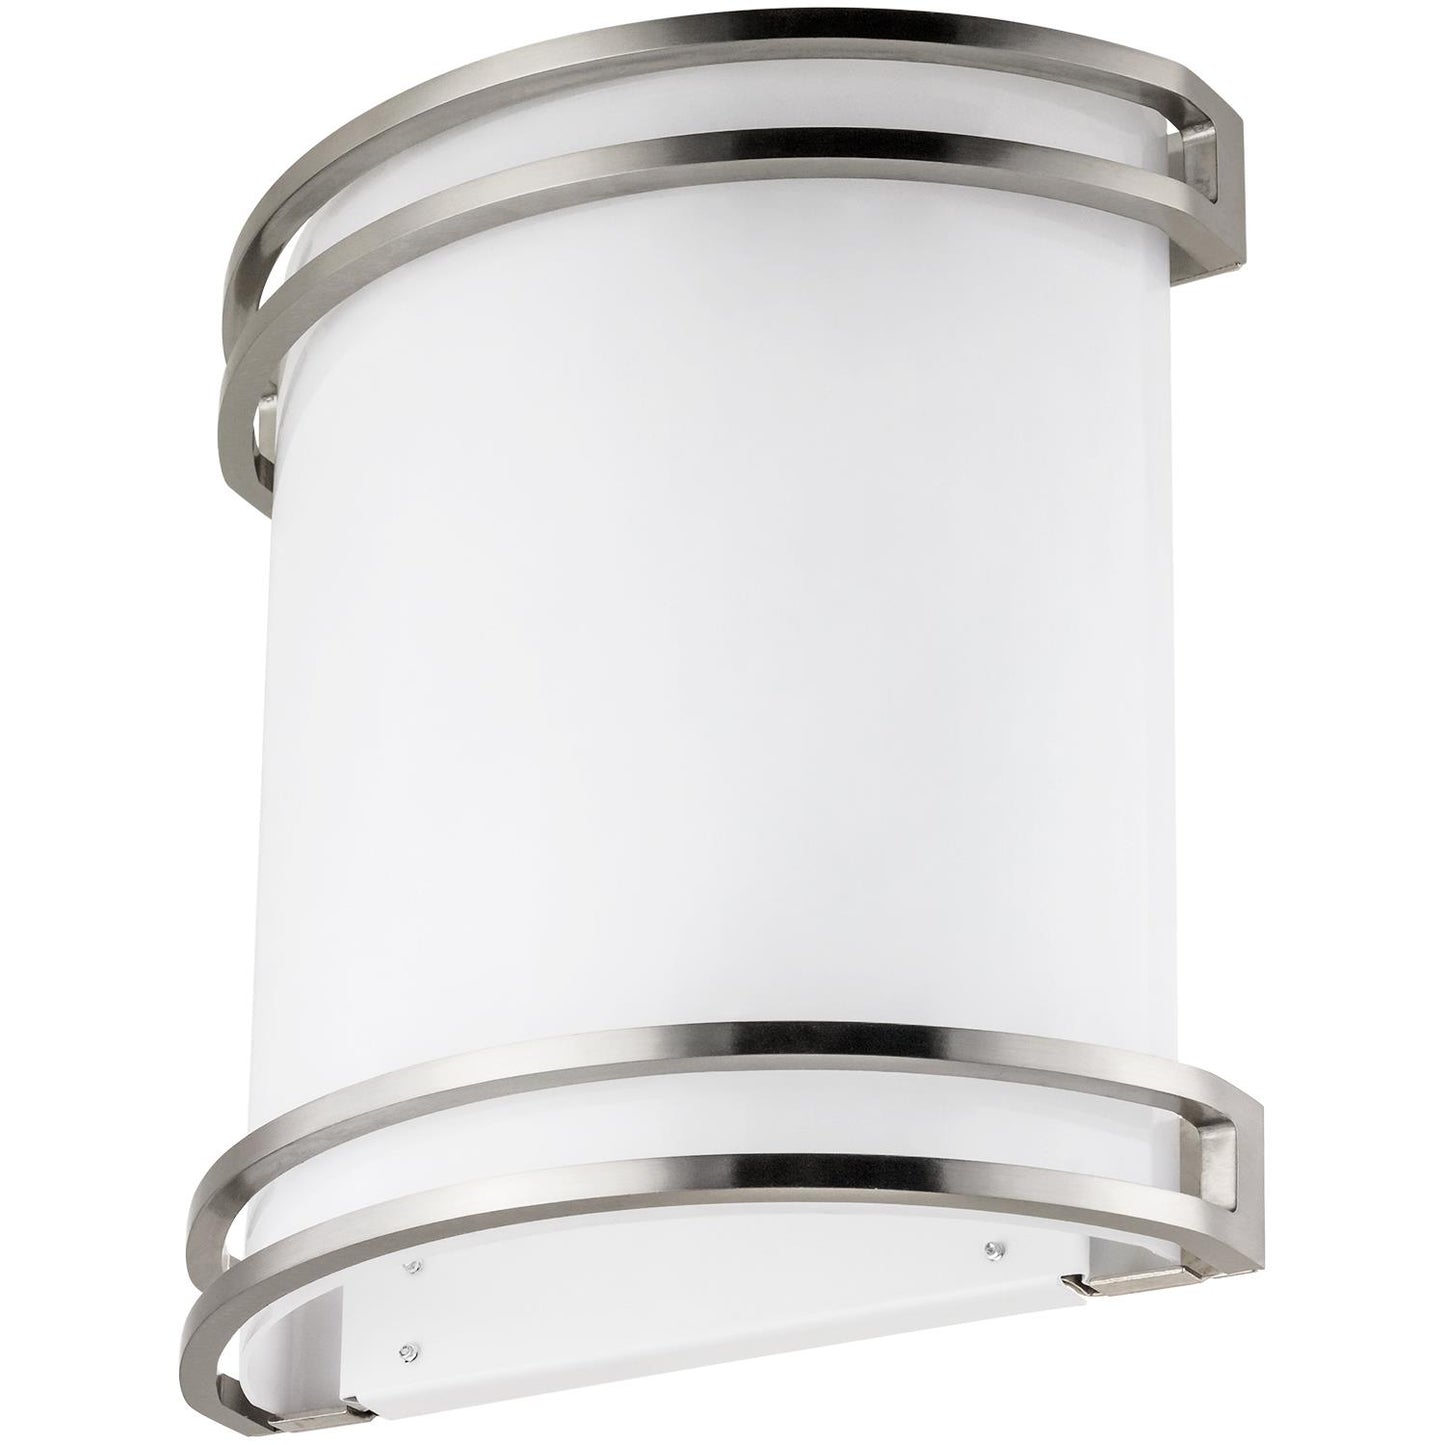 Sunlite 49137-SU LED Half Cylinder Wall Sconce Fixture with Brushed Nickel Finish, 610 Lumens, 23 Watt, Dimmable, UL Listed, Energy Star, 10"", 30K - Warm White